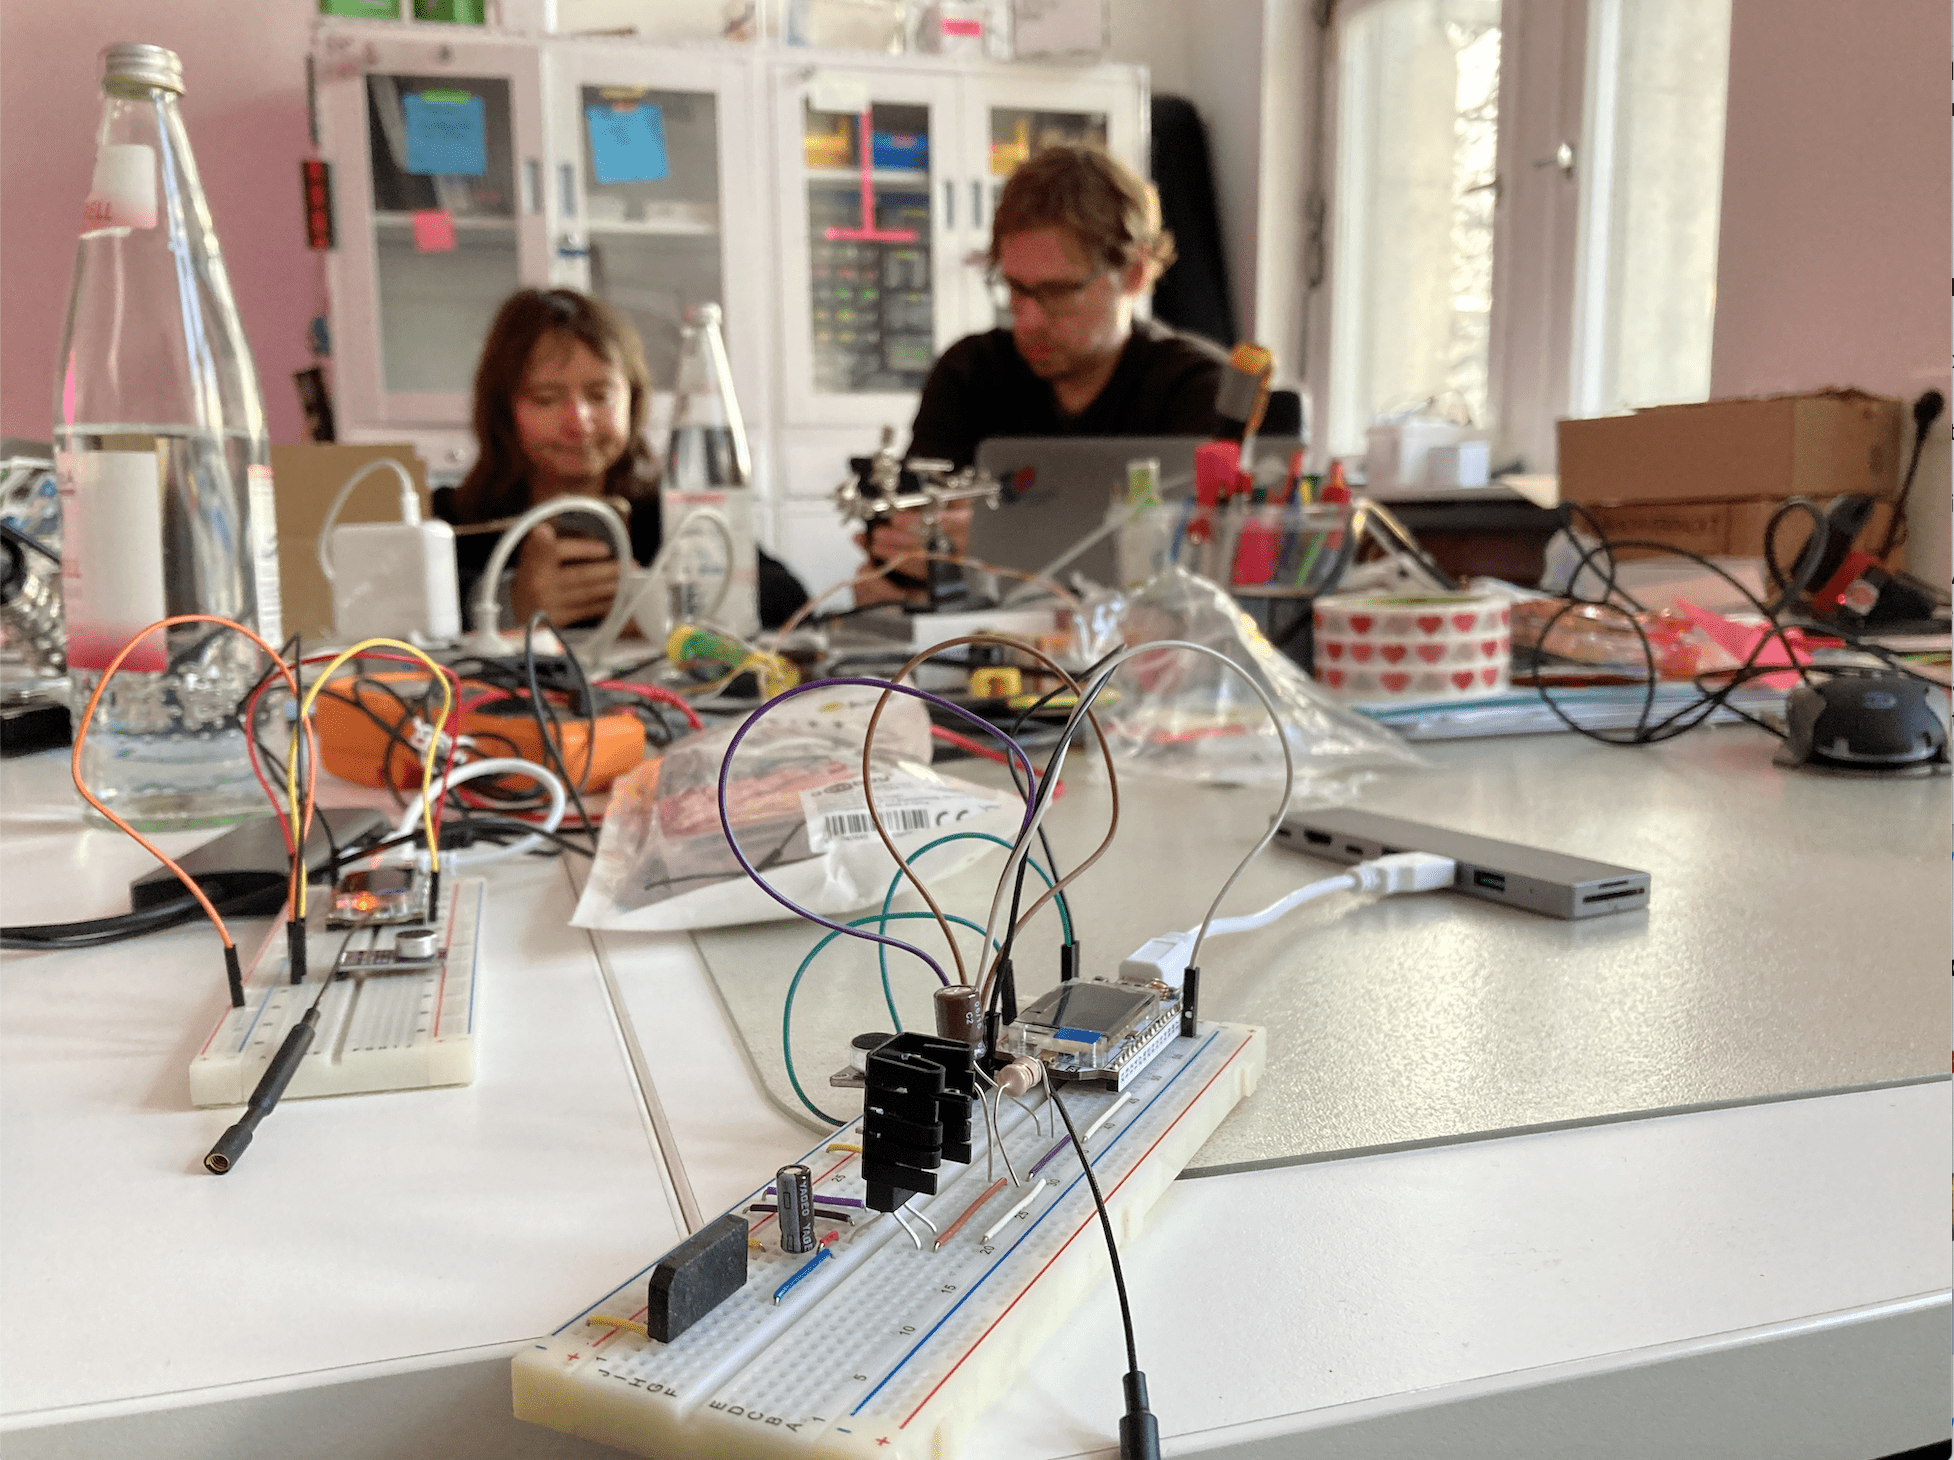 Boards, sensors, and cables are on top of a table while two people are working in the background